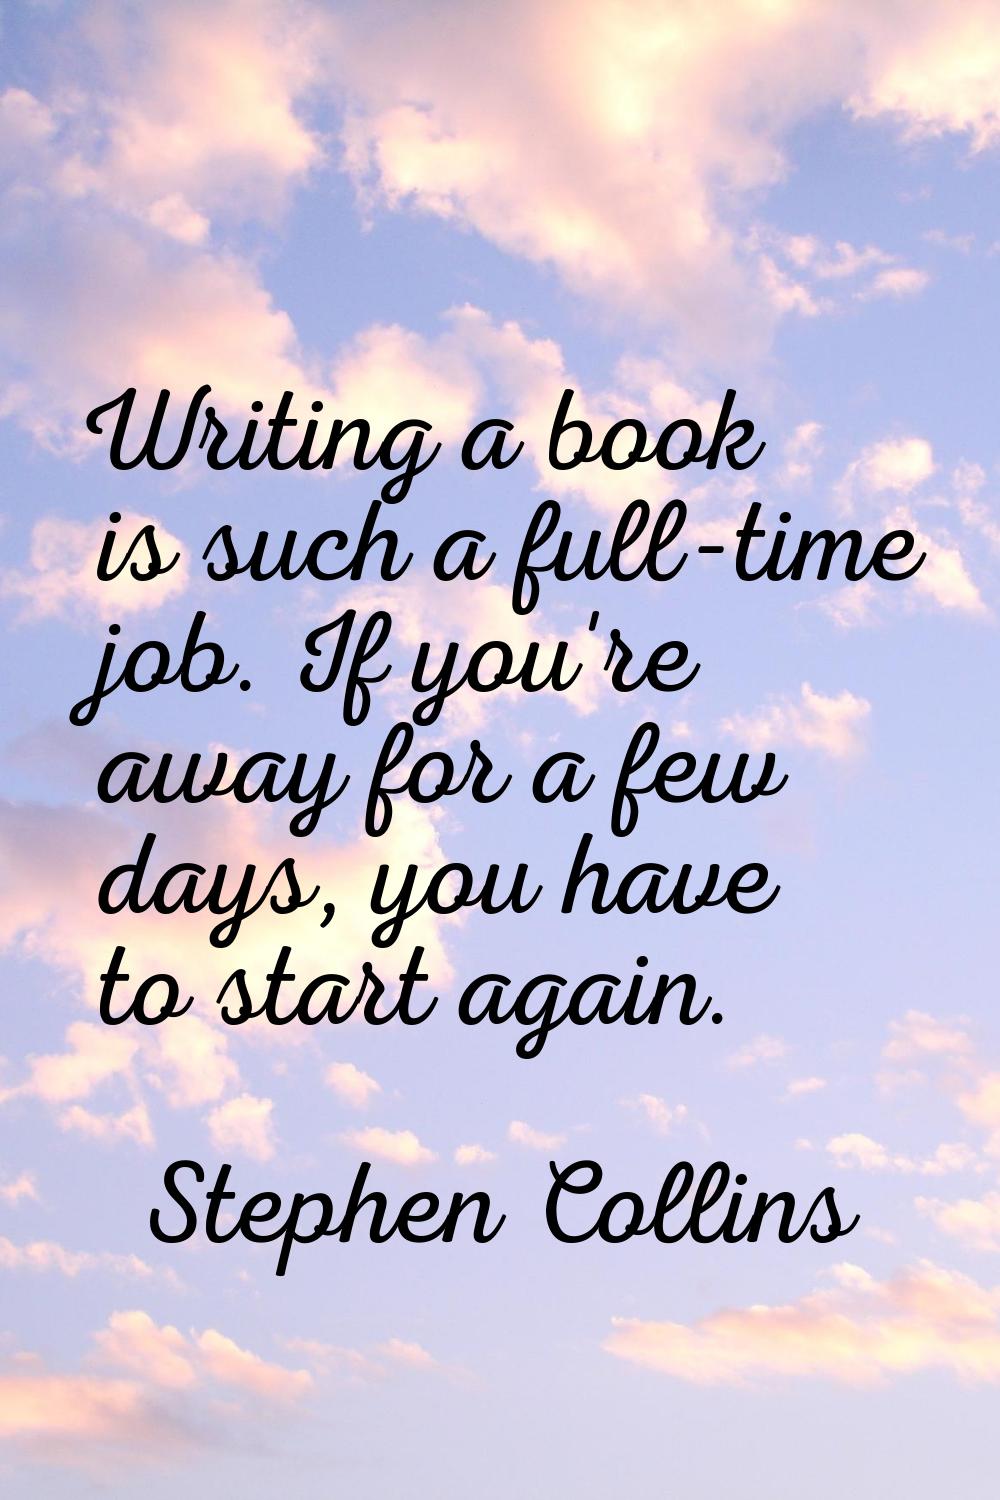 Writing a book is such a full-time job. If you're away for a few days, you have to start again.